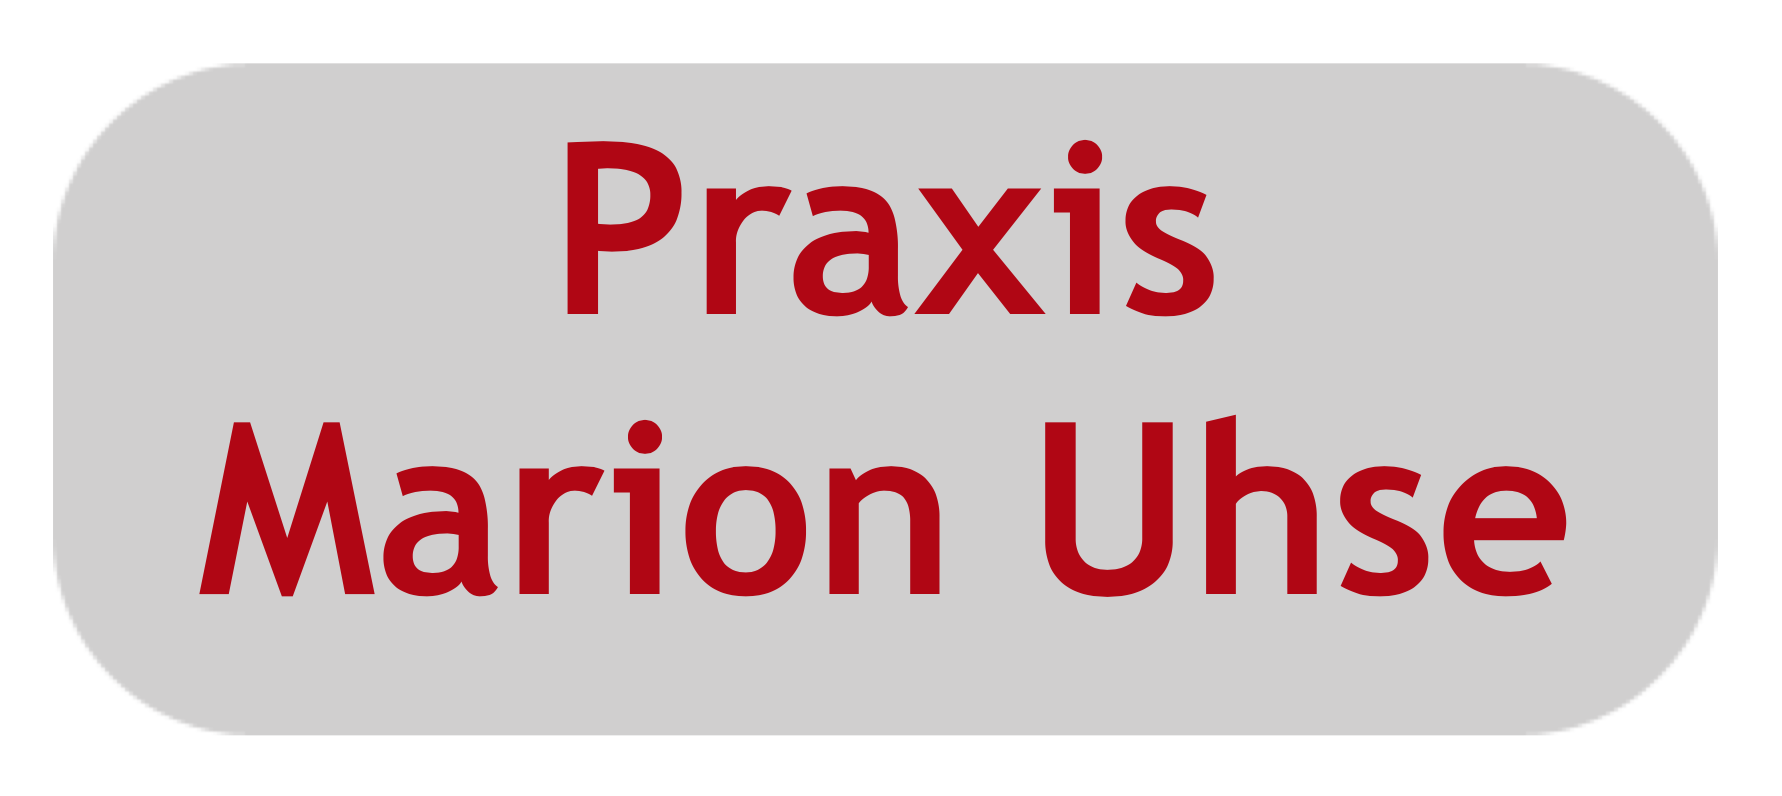 Praxis Marion Uhse